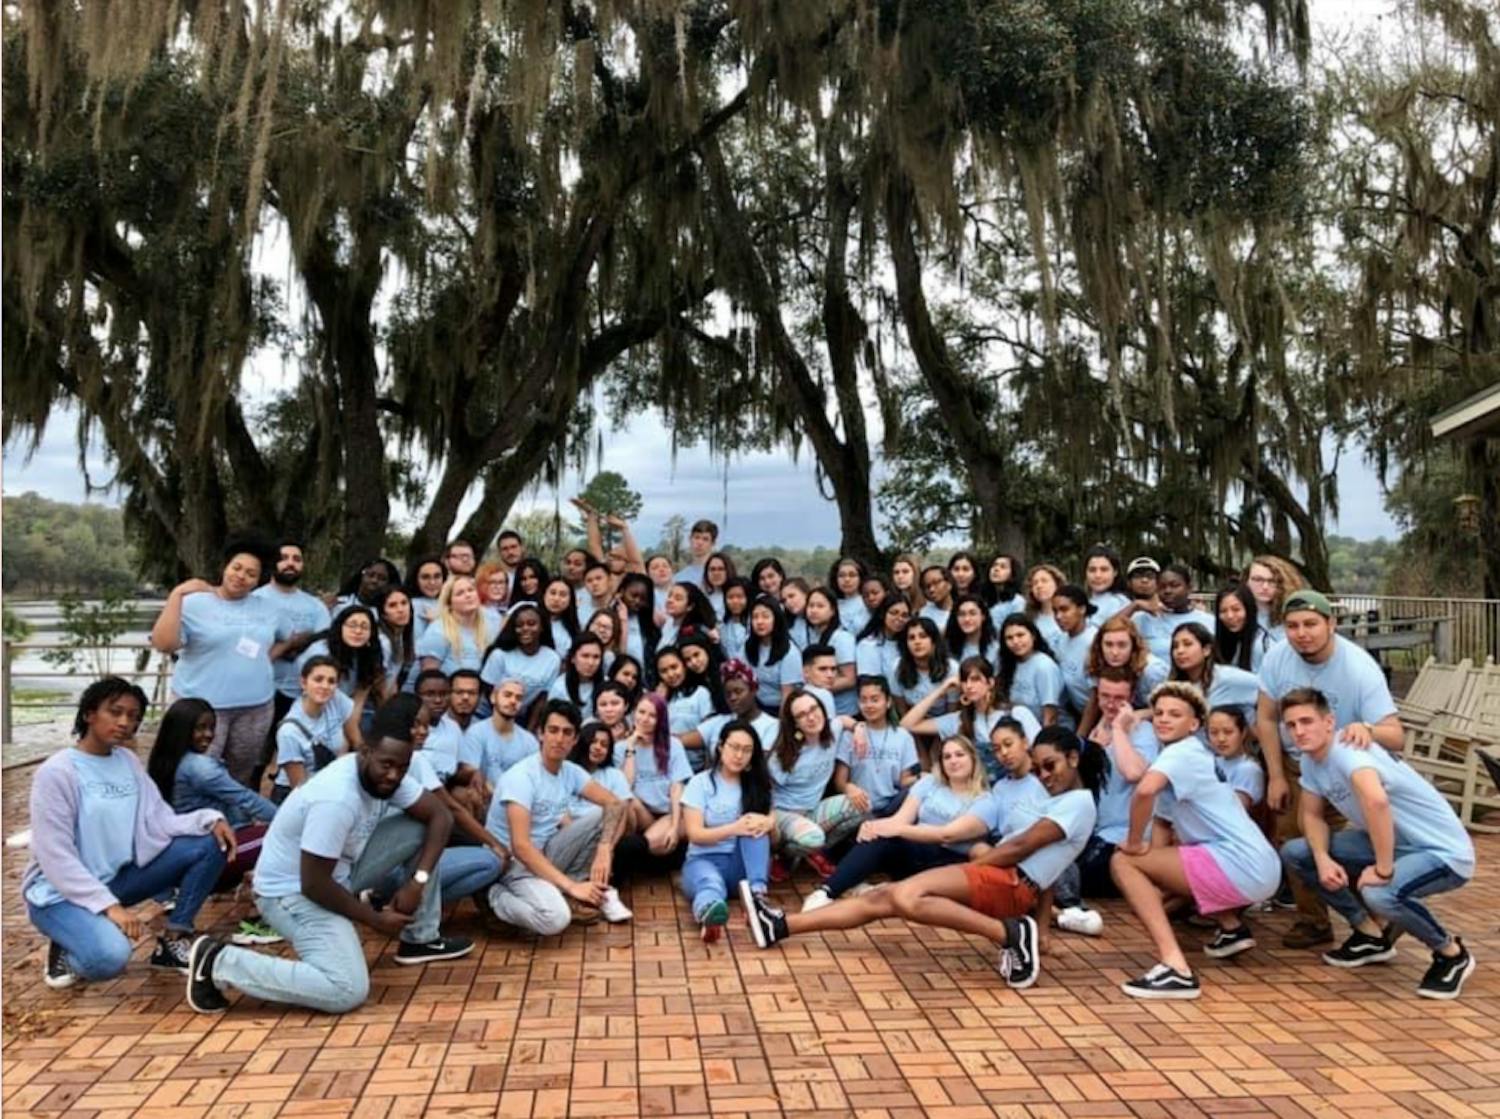 Emma Sanchez, a 19-year-old UF international studies sophomore, attended the fourth weekend of Gatorship in Spring 2019.